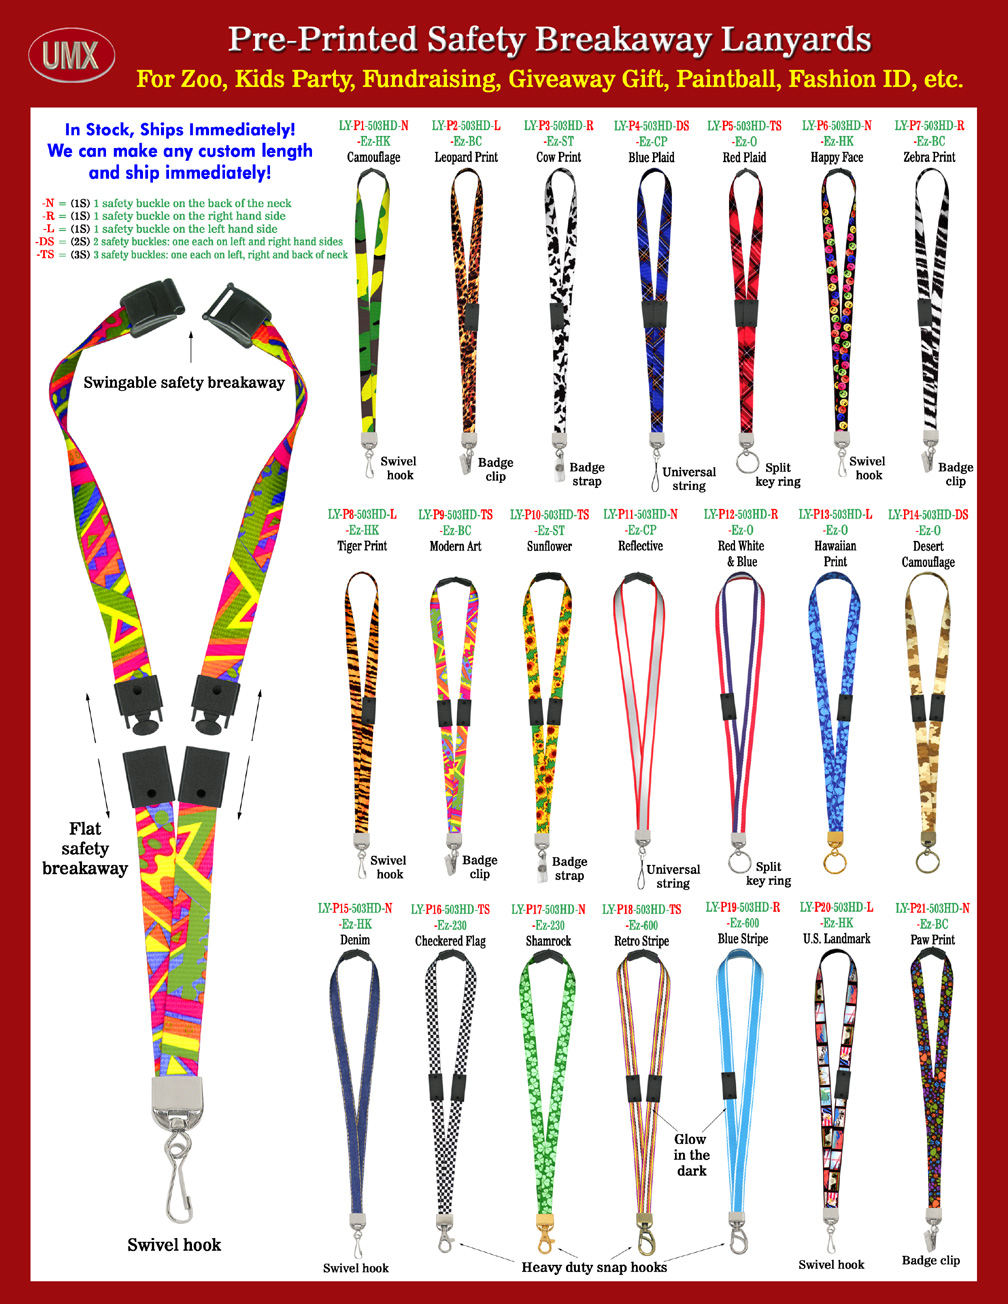 Cool and Unique Designed ID Tag Lanyards With Multiple Safety Breakaway Pre-Printed Themes